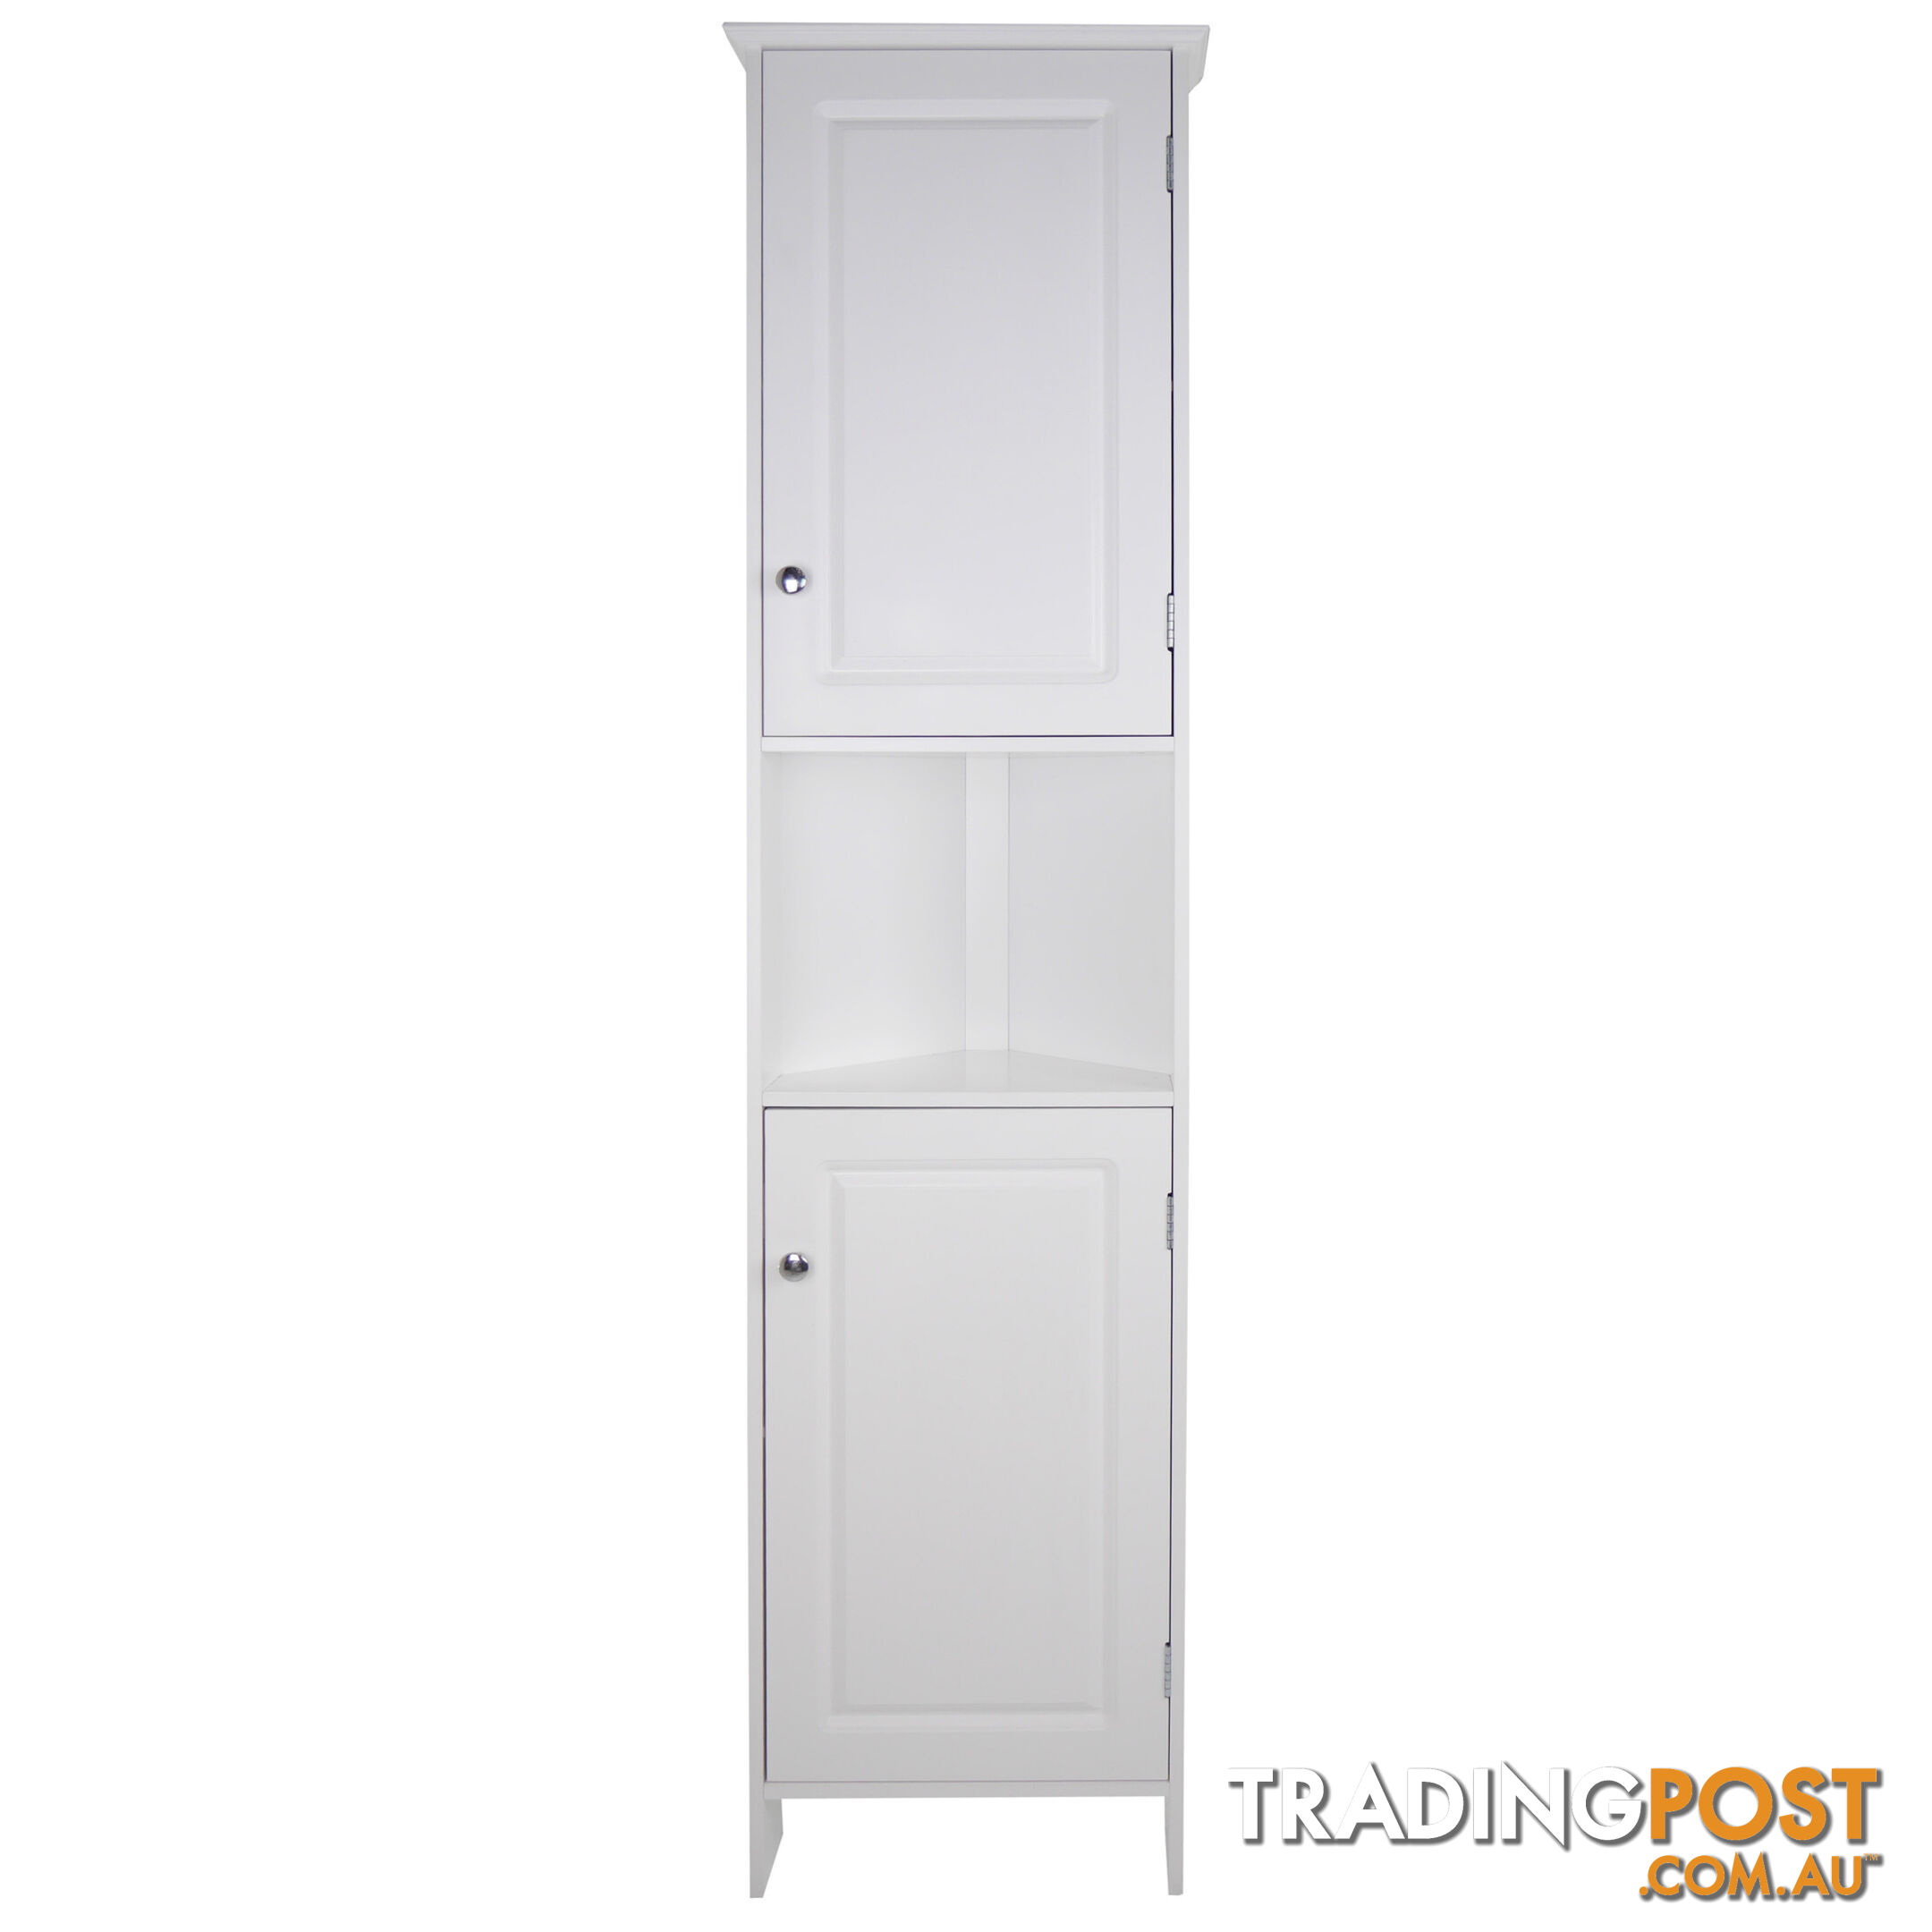 Dignity Tall Corner Cupboard with 2 Doors in WHITE